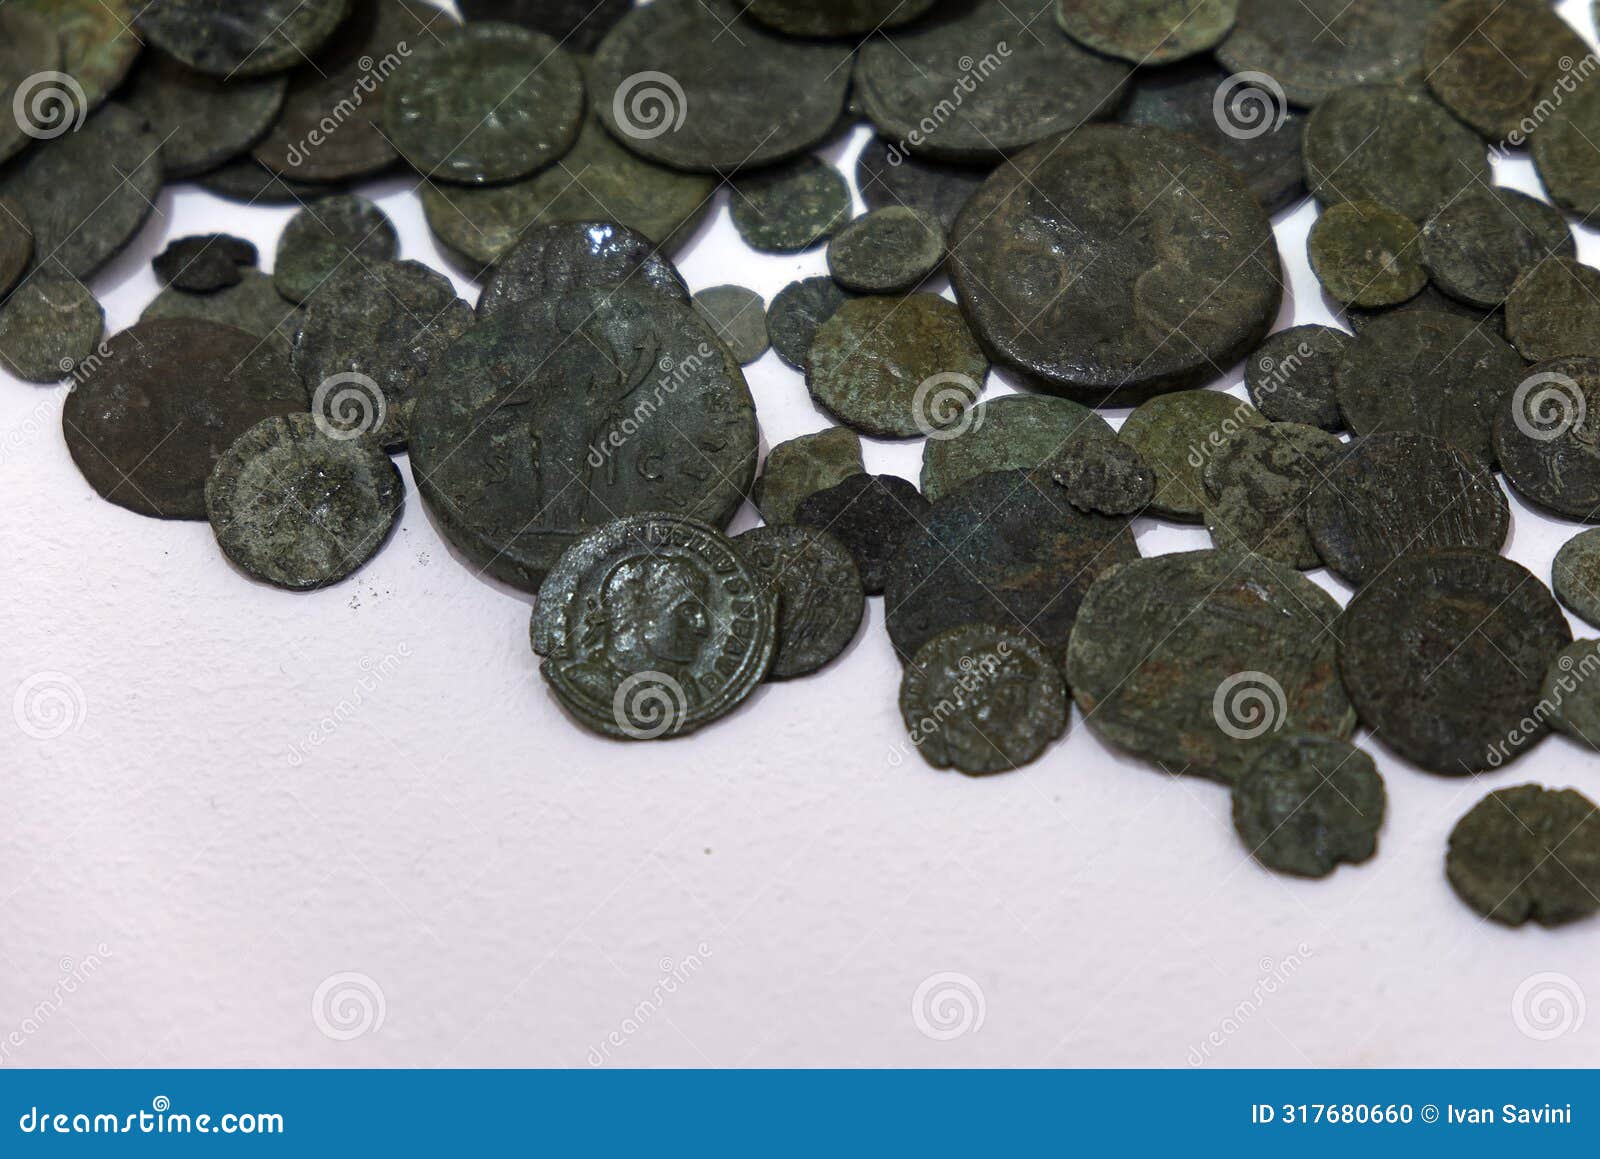 a hoard of old coins